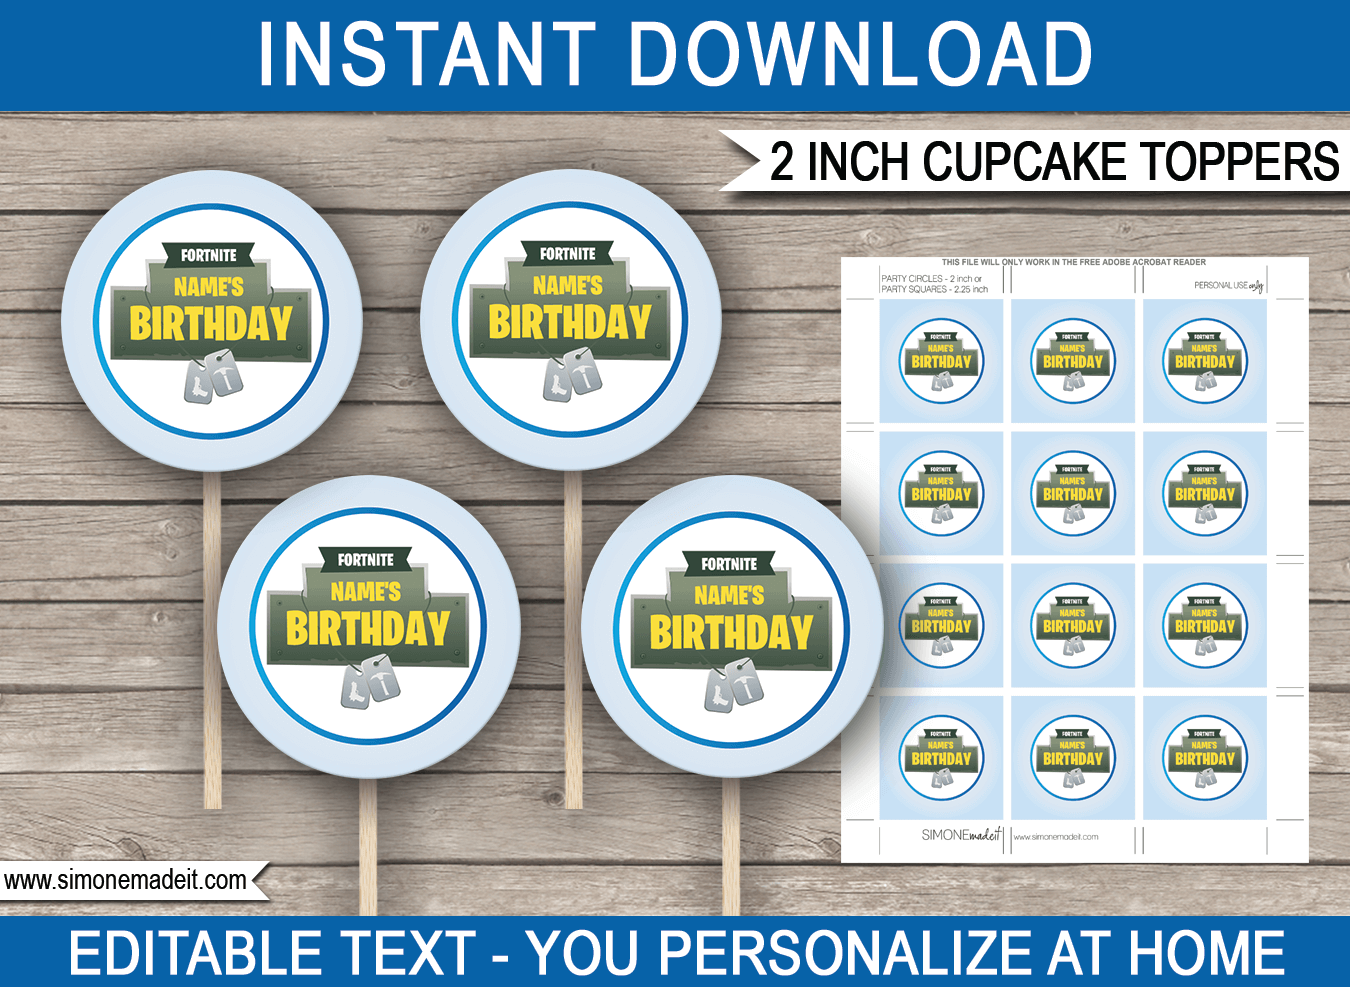 Printable Fortnite Cupcake Toppers | Fortnite Birthday Party Decorations | Battle Royale | 2 inch | Gift Tags | DIY Editable & Printable Template | INSTANT DOWNLOAD via simonemadeit.com